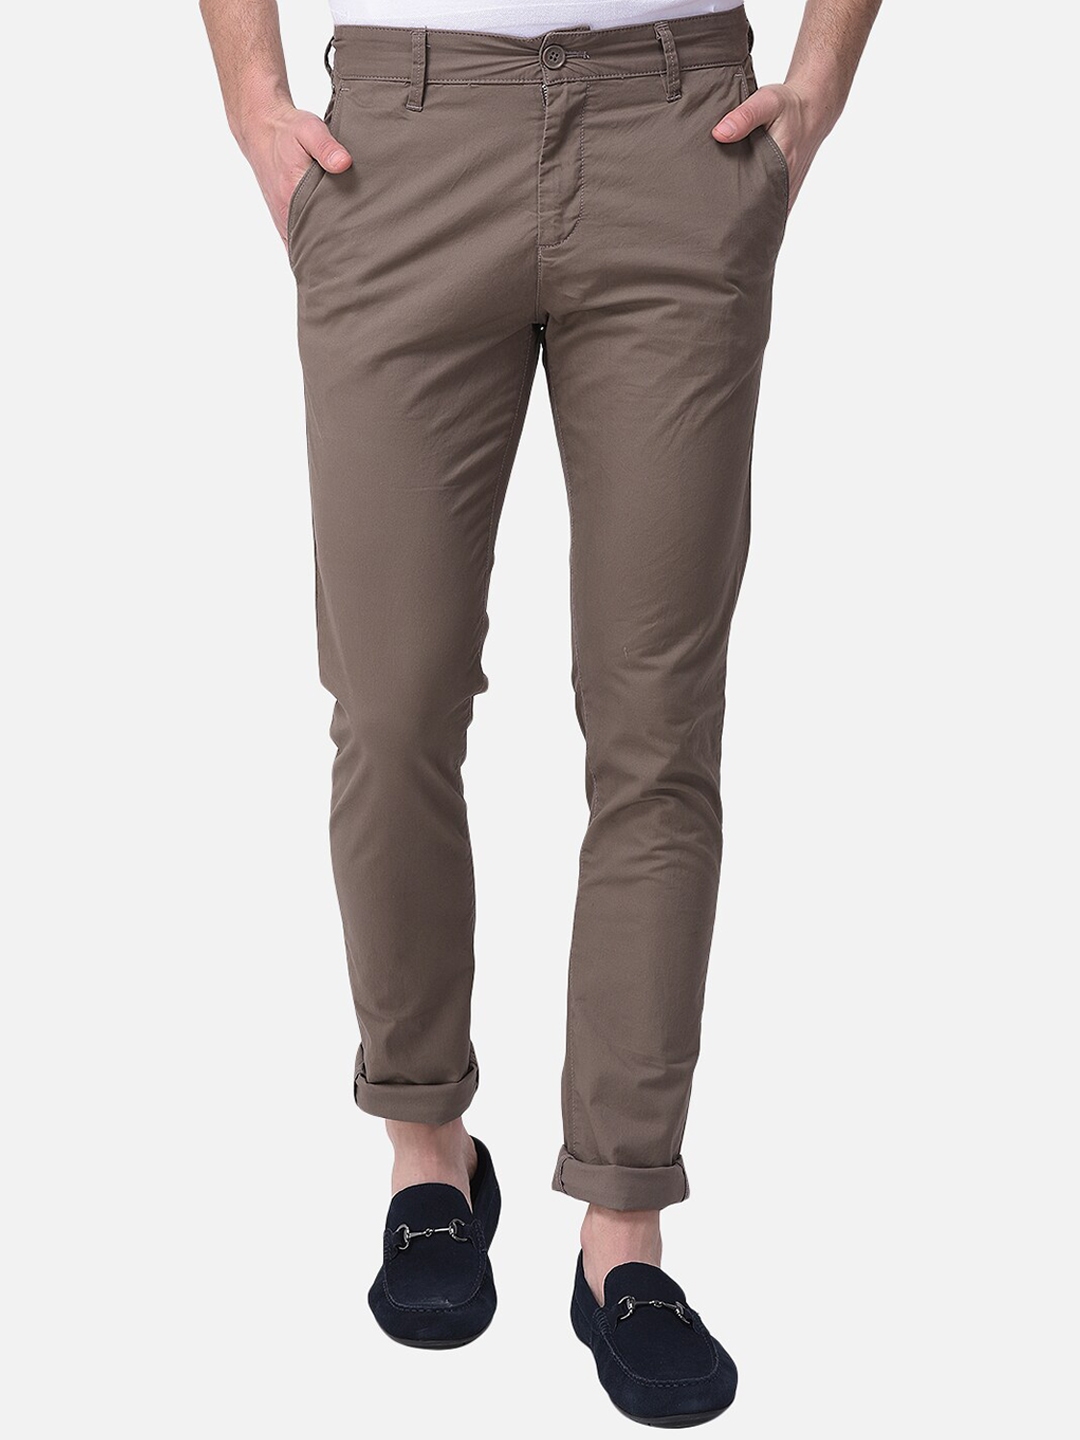 Buy Woodland Men Brown Chinos Trousers - Trousers for Men 17430480 | Myntra